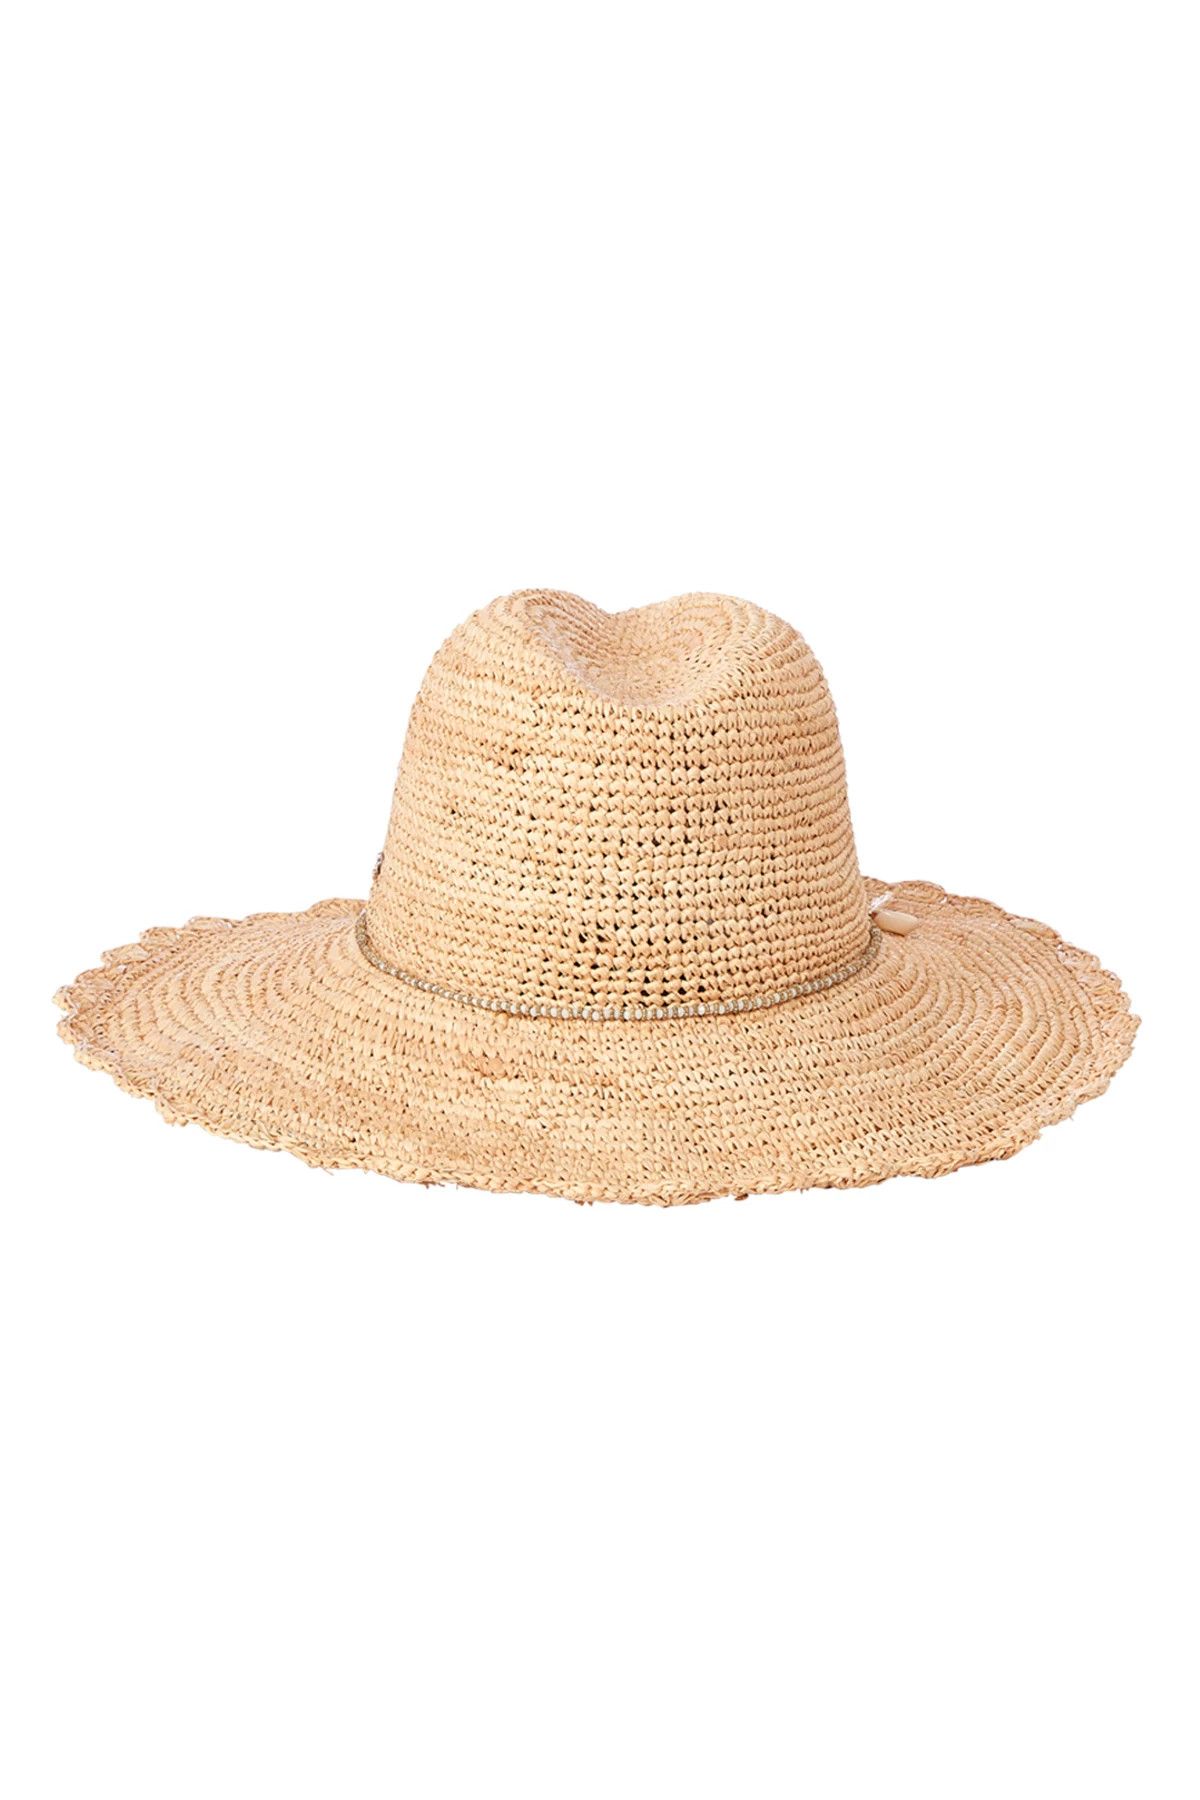 Adelee Panama Hat | Everything But Water